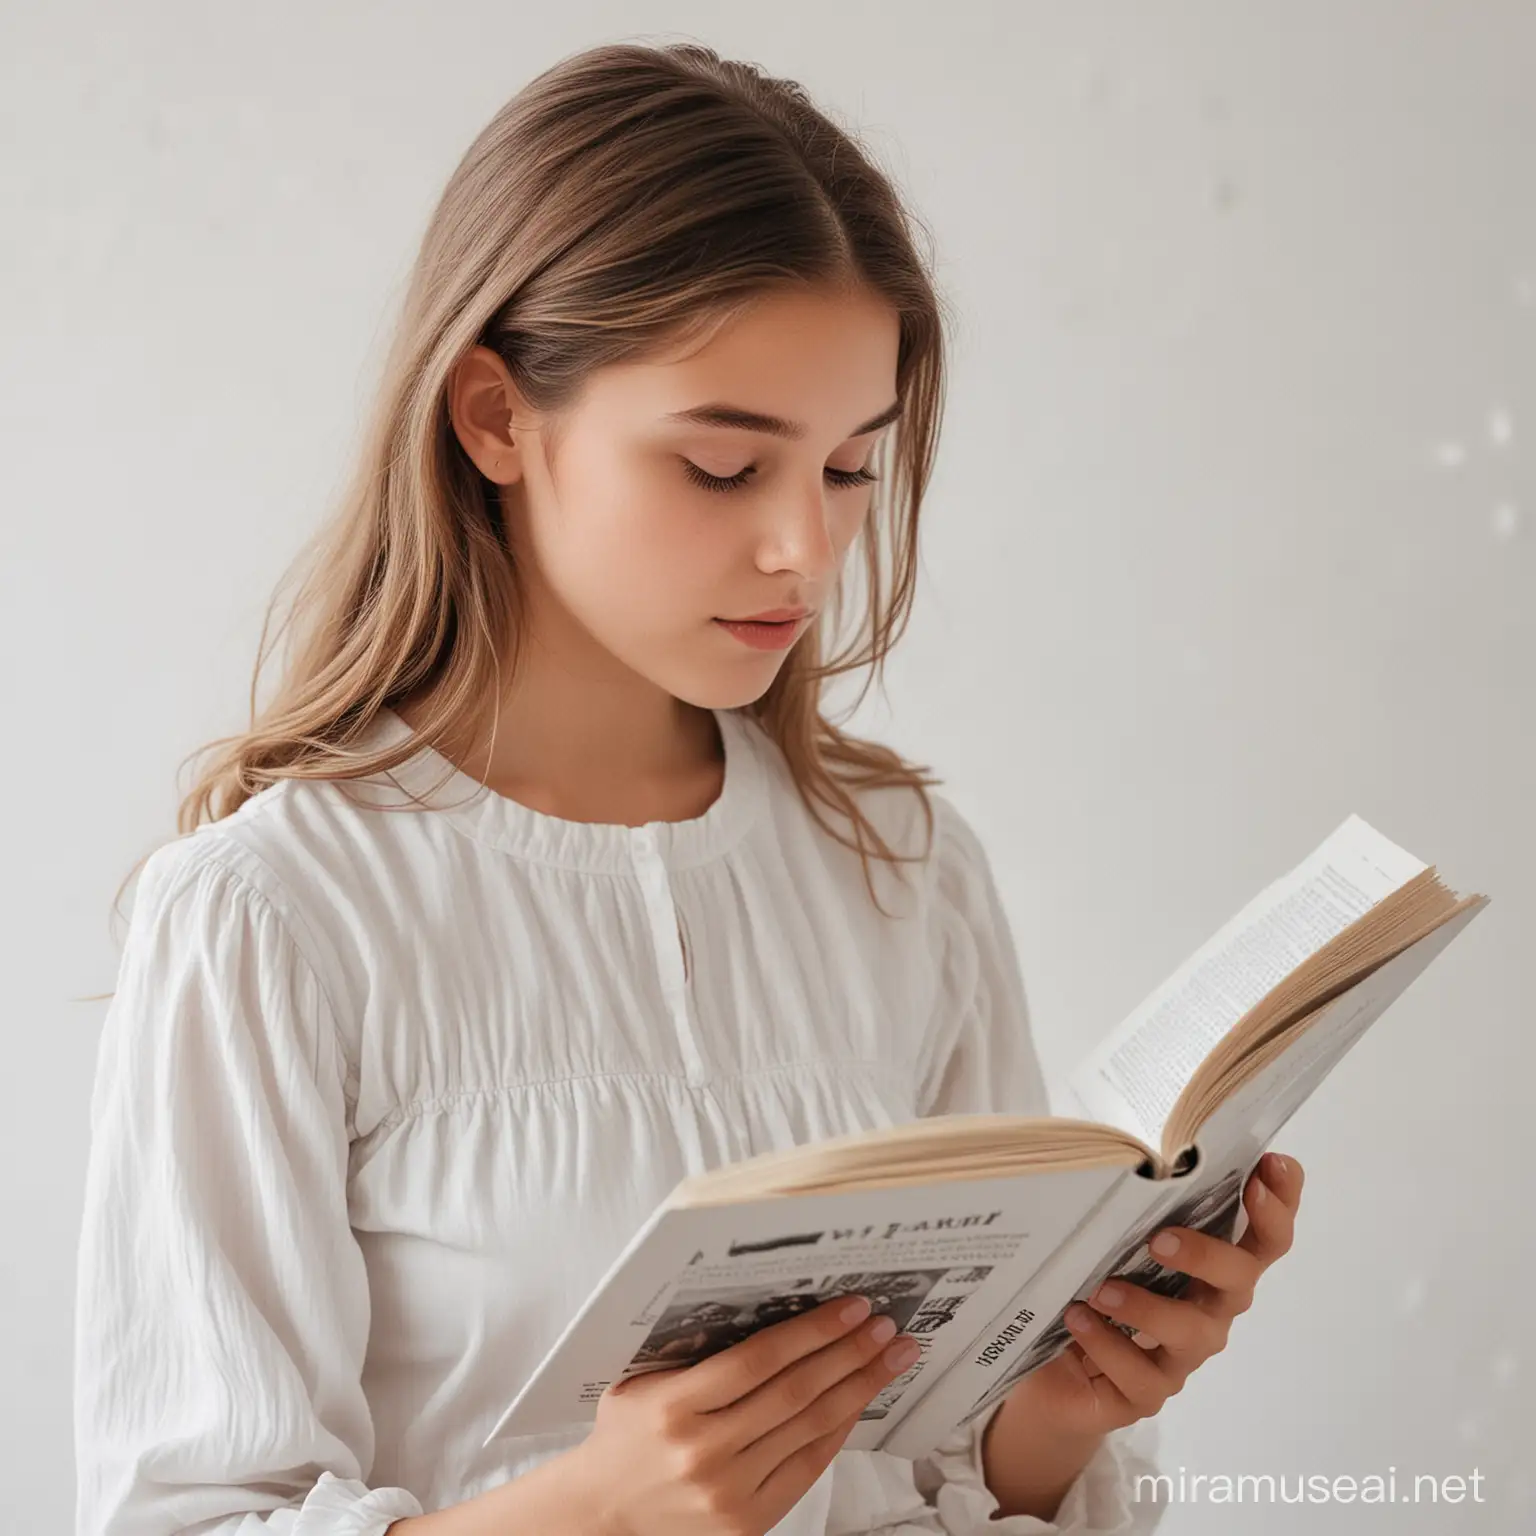 Girl Reading Picture Story Book in Serene White Setting